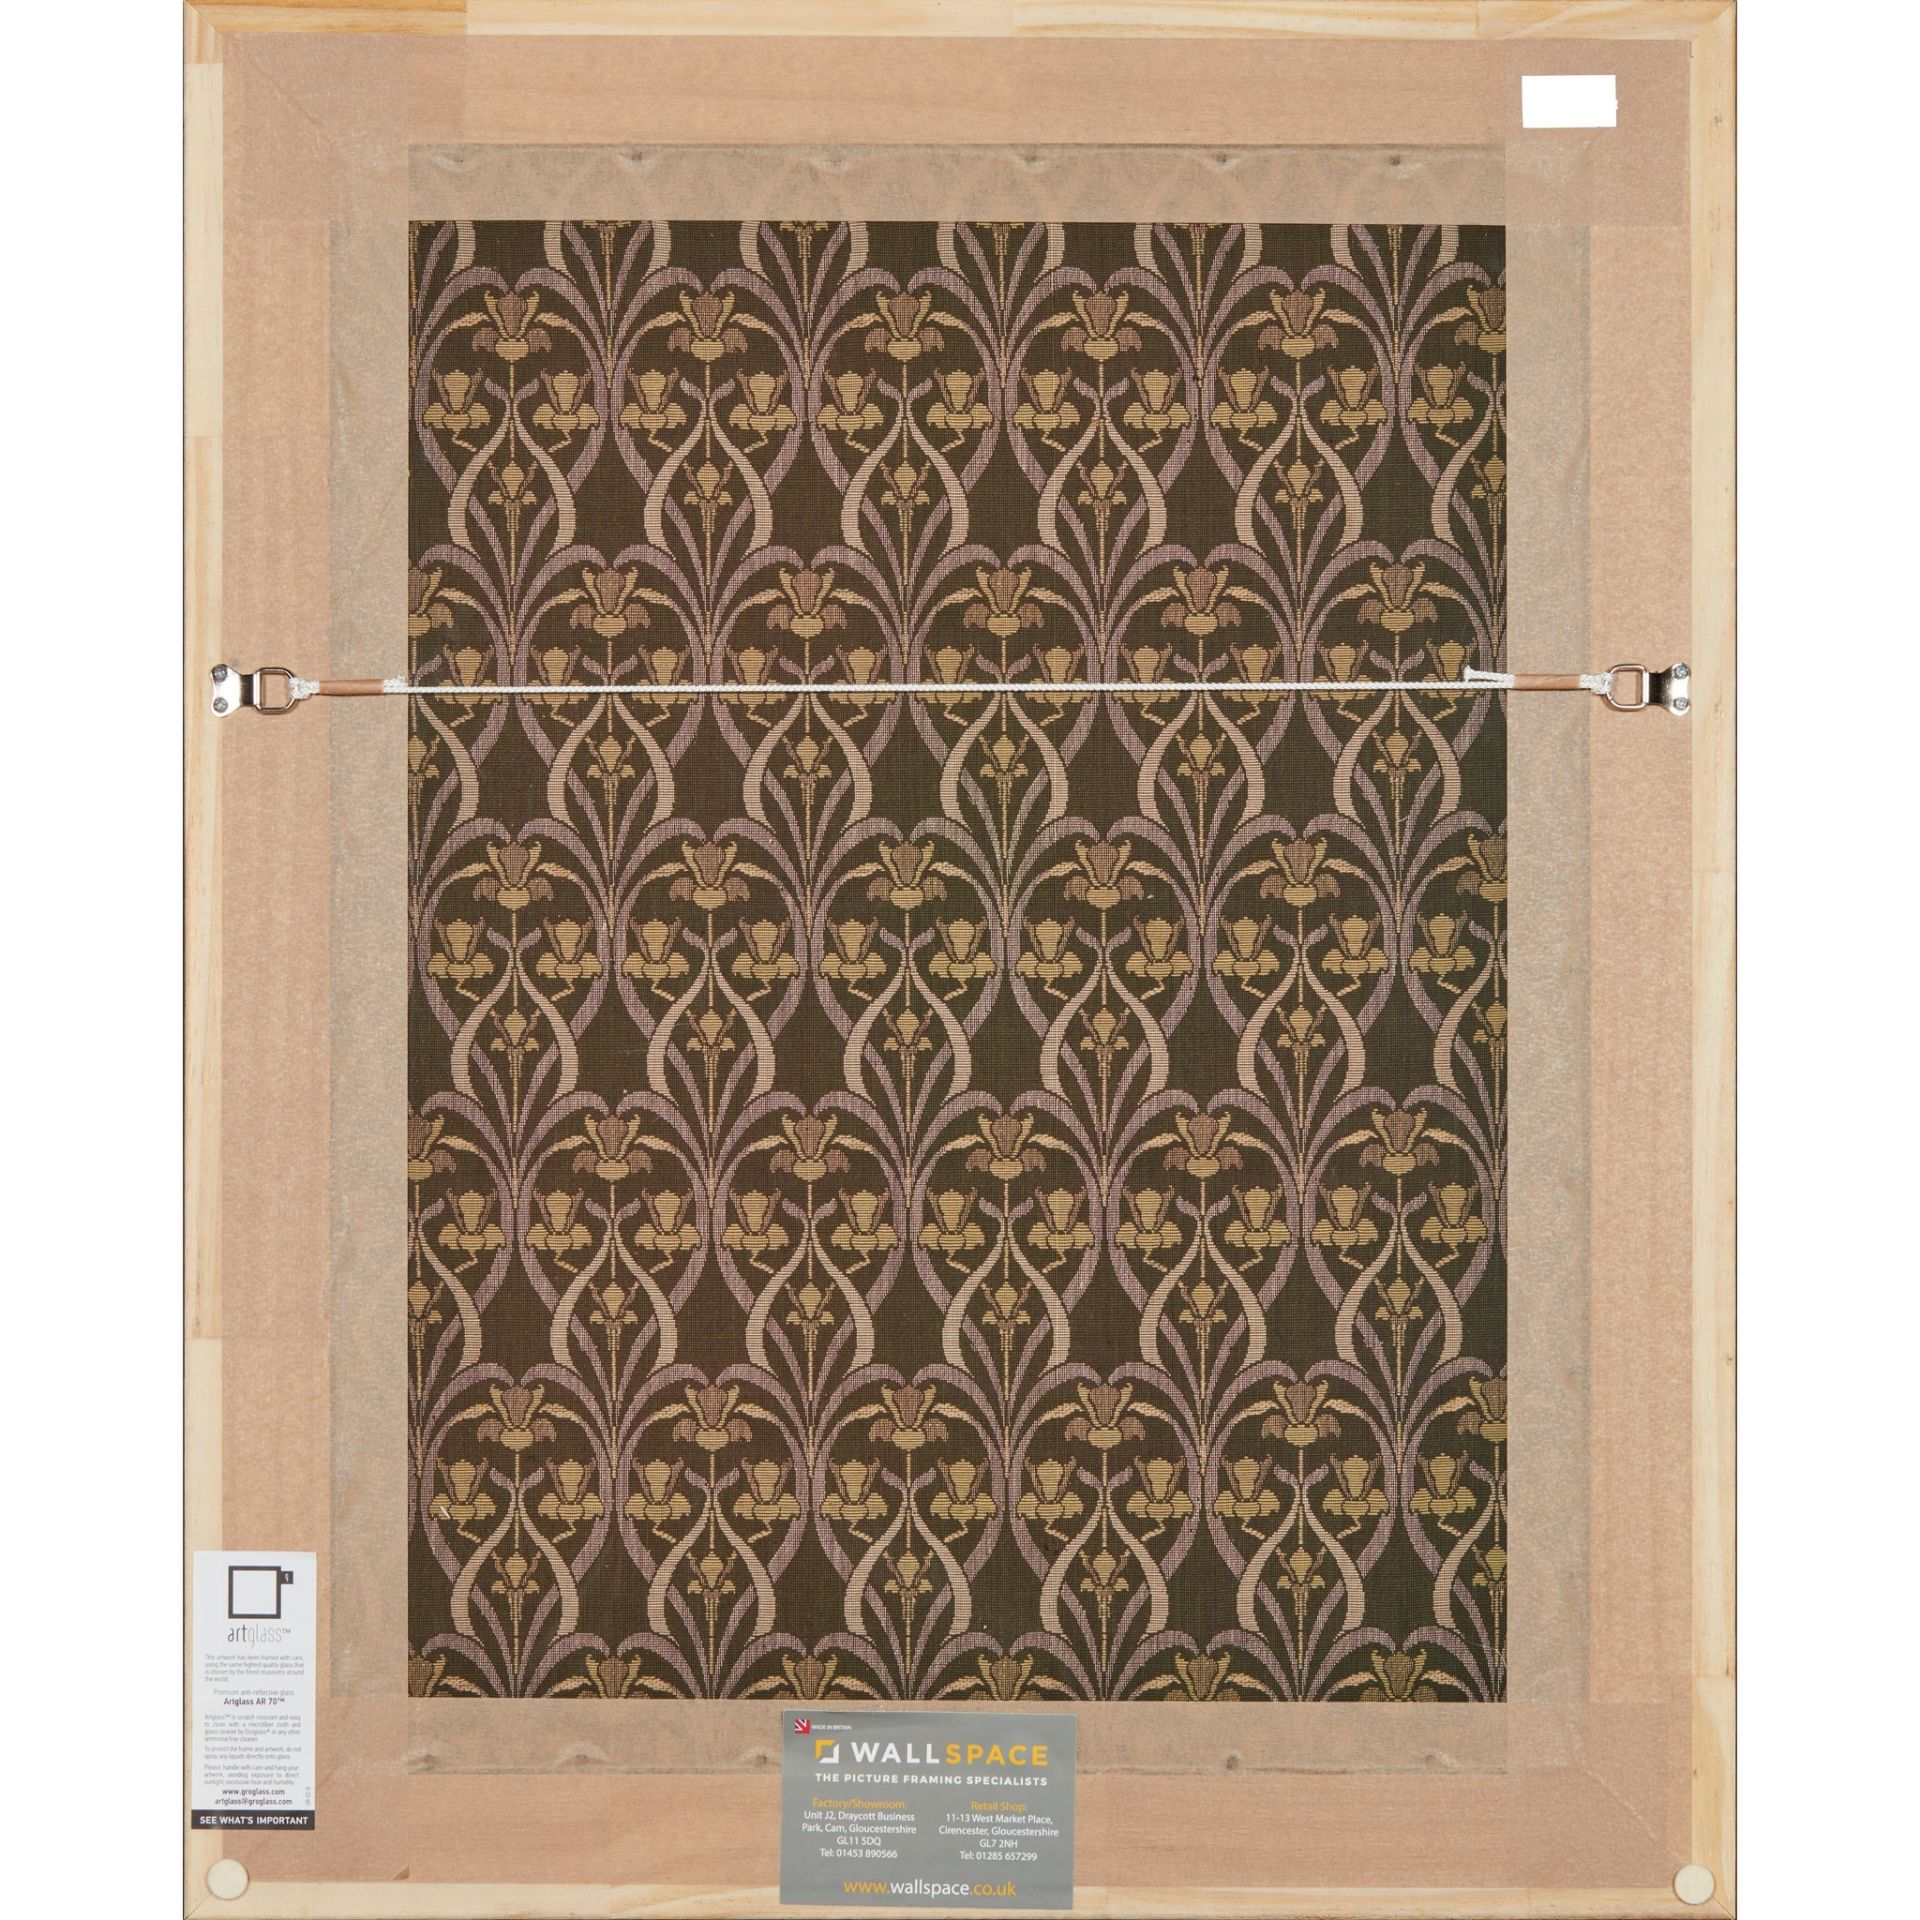 MANNER OF LEWIS FOREMAN DAY FRAMED FABRIC PANEL, CIRCA 1900 - Image 3 of 3